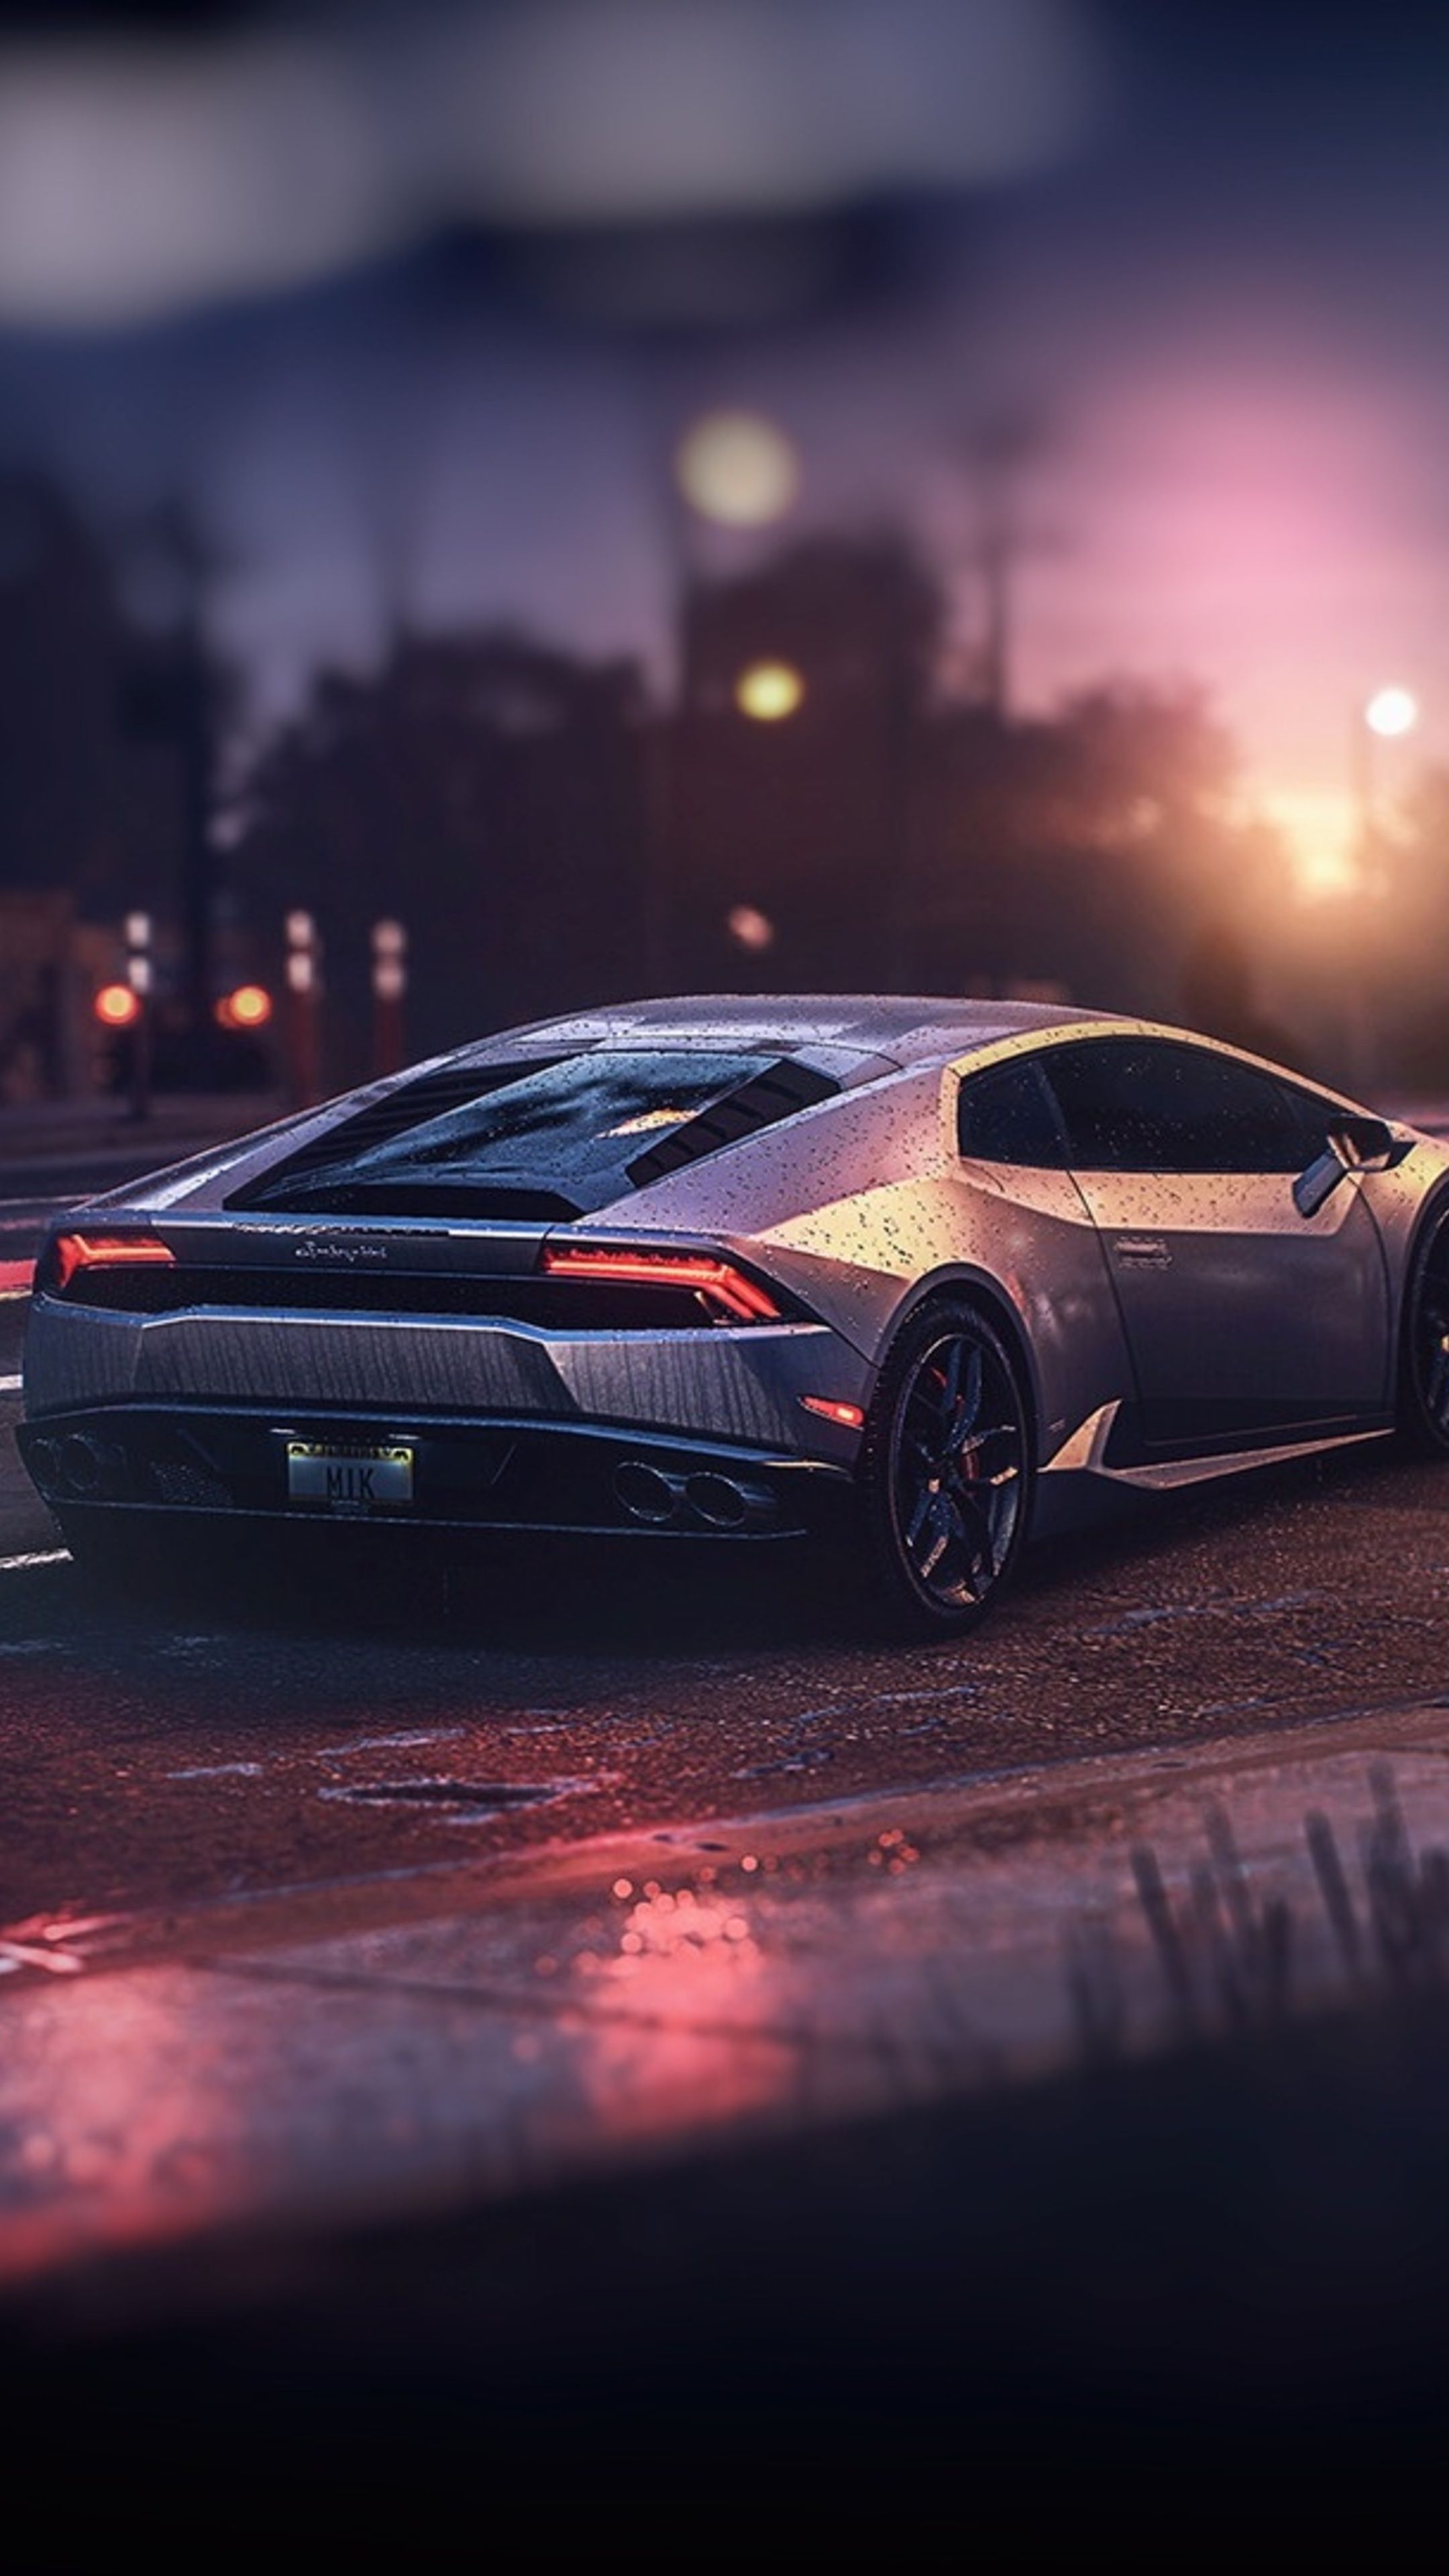 Lamborghini Aventador And Huracan GTA Online The Outrun Overdrive DLC Sony Xperia X, XZ, Z5 Premium HD 4k Wallpaper, Image, Background, Photo and Picture